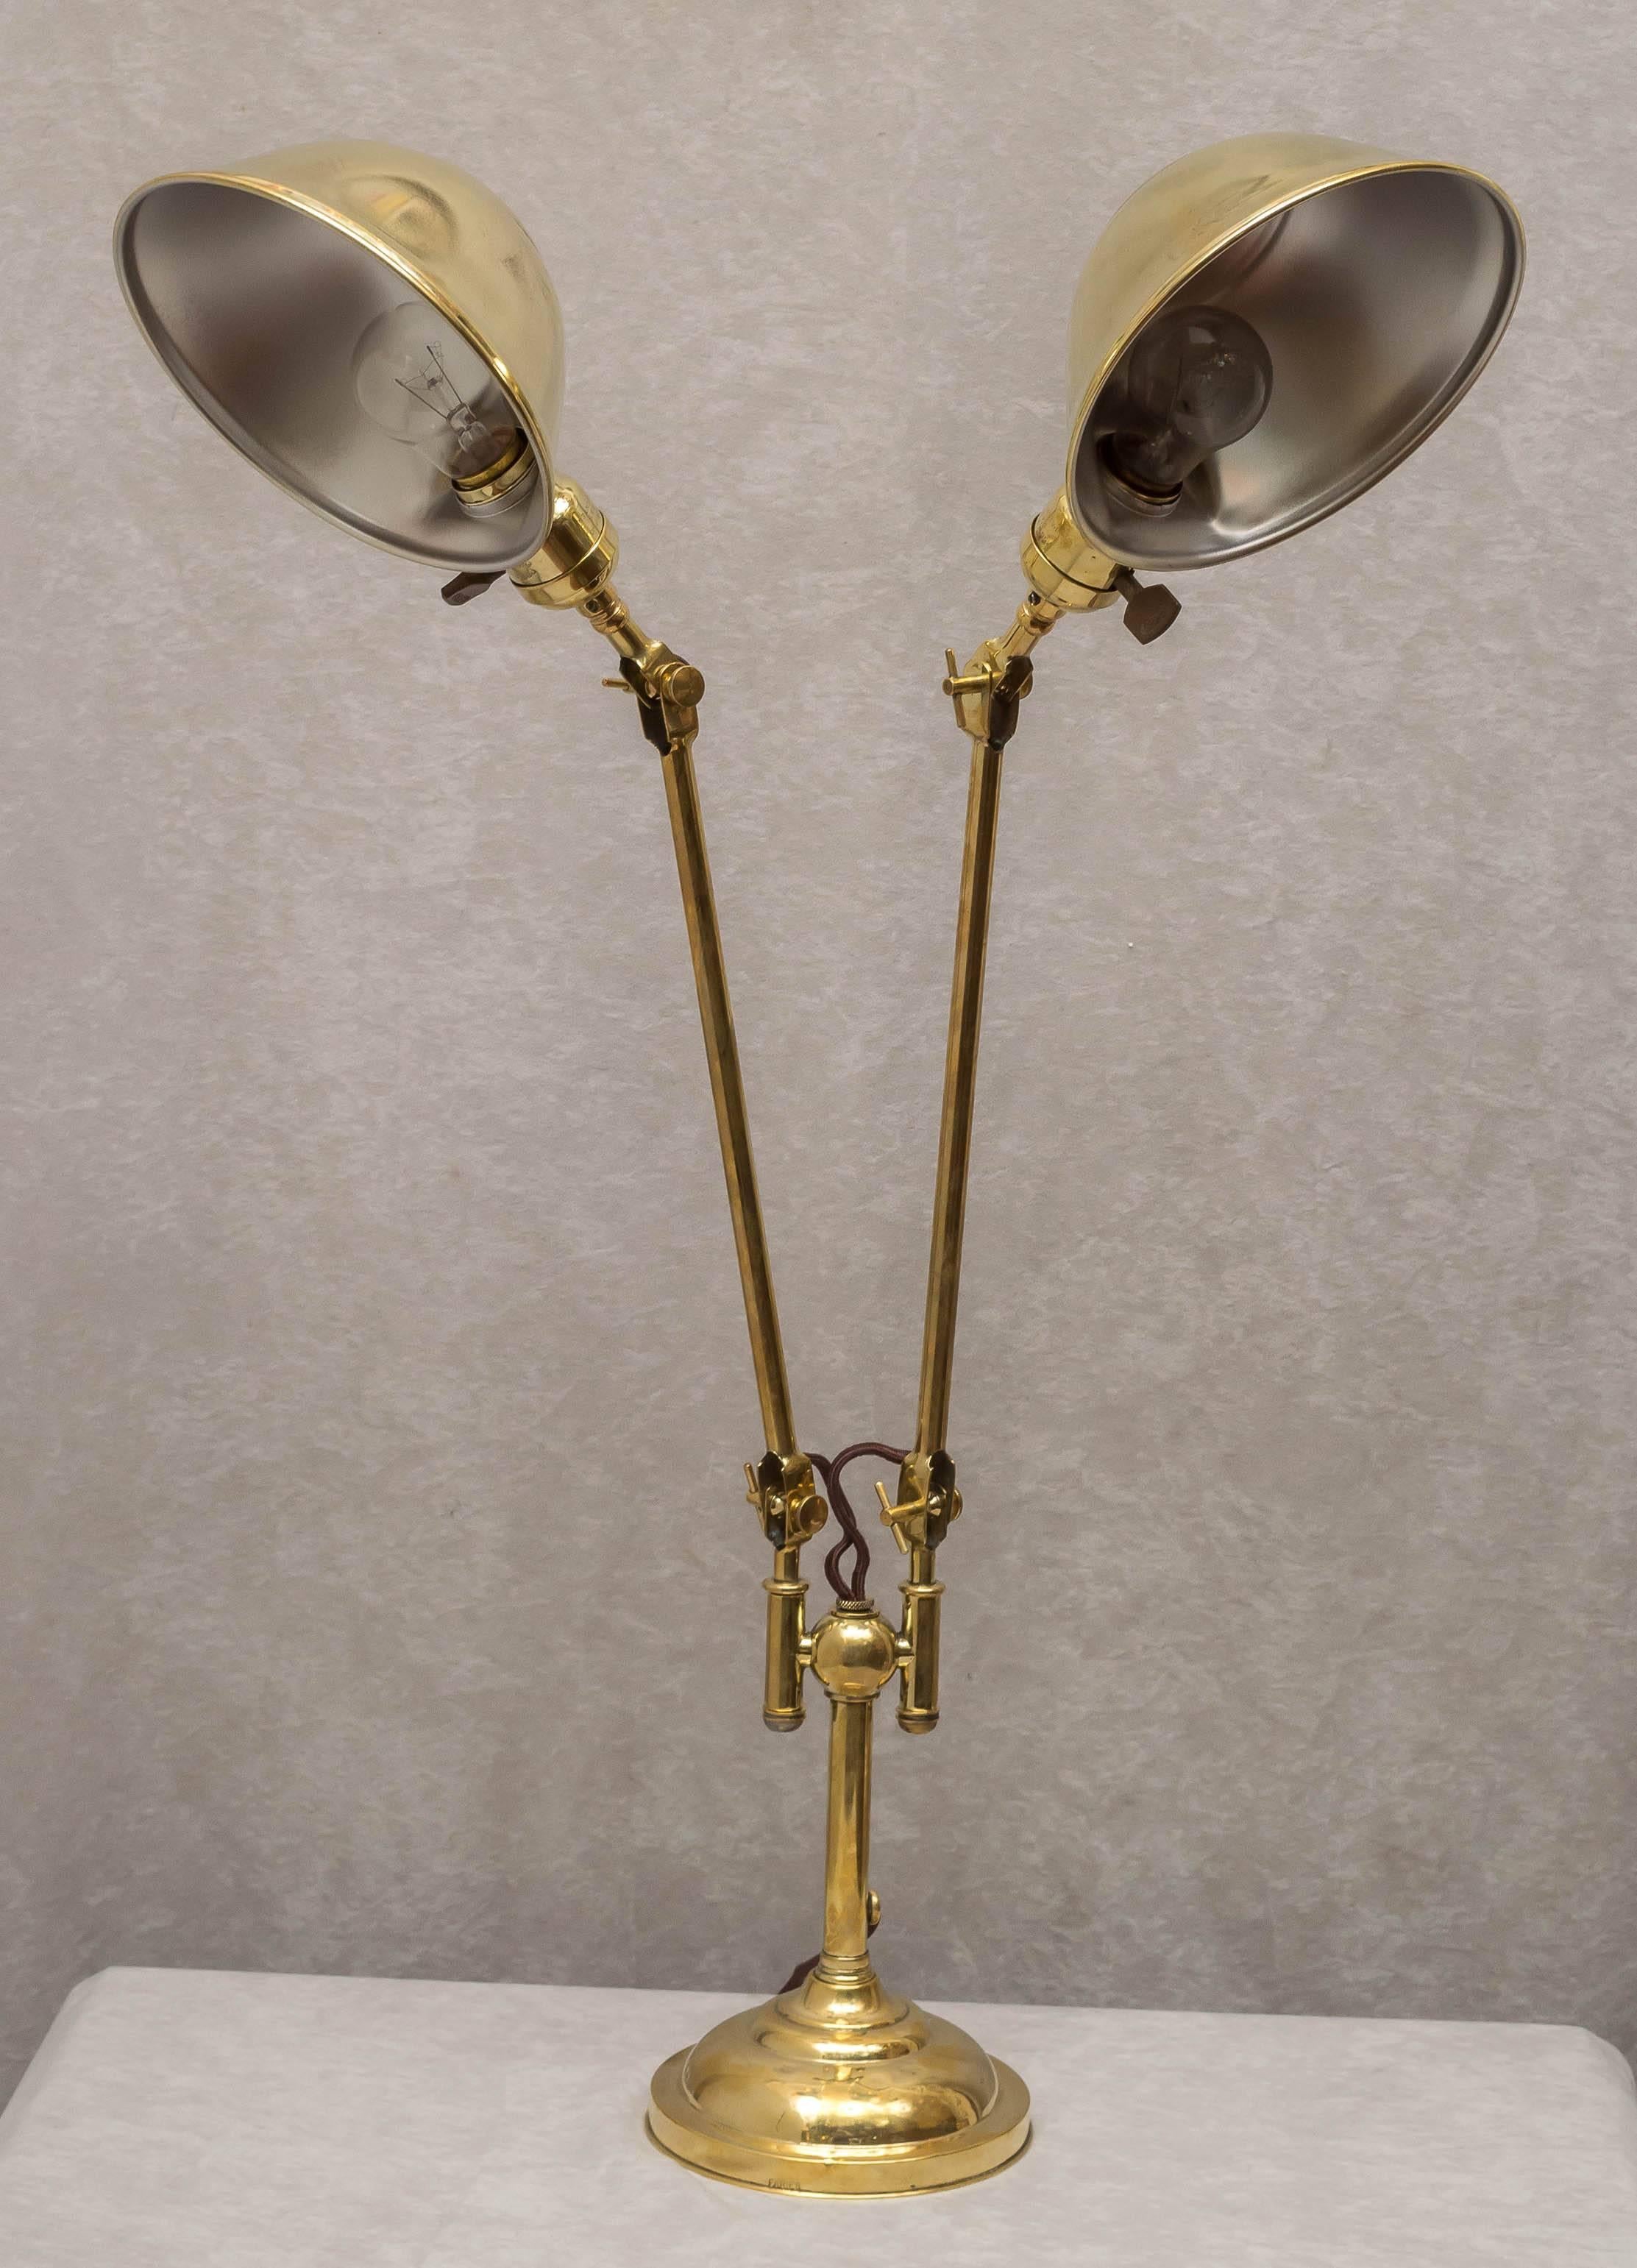 Early 20th Century Rare Early Machine Age Double Arm Brass Lamp, Faries Company, circa 1900